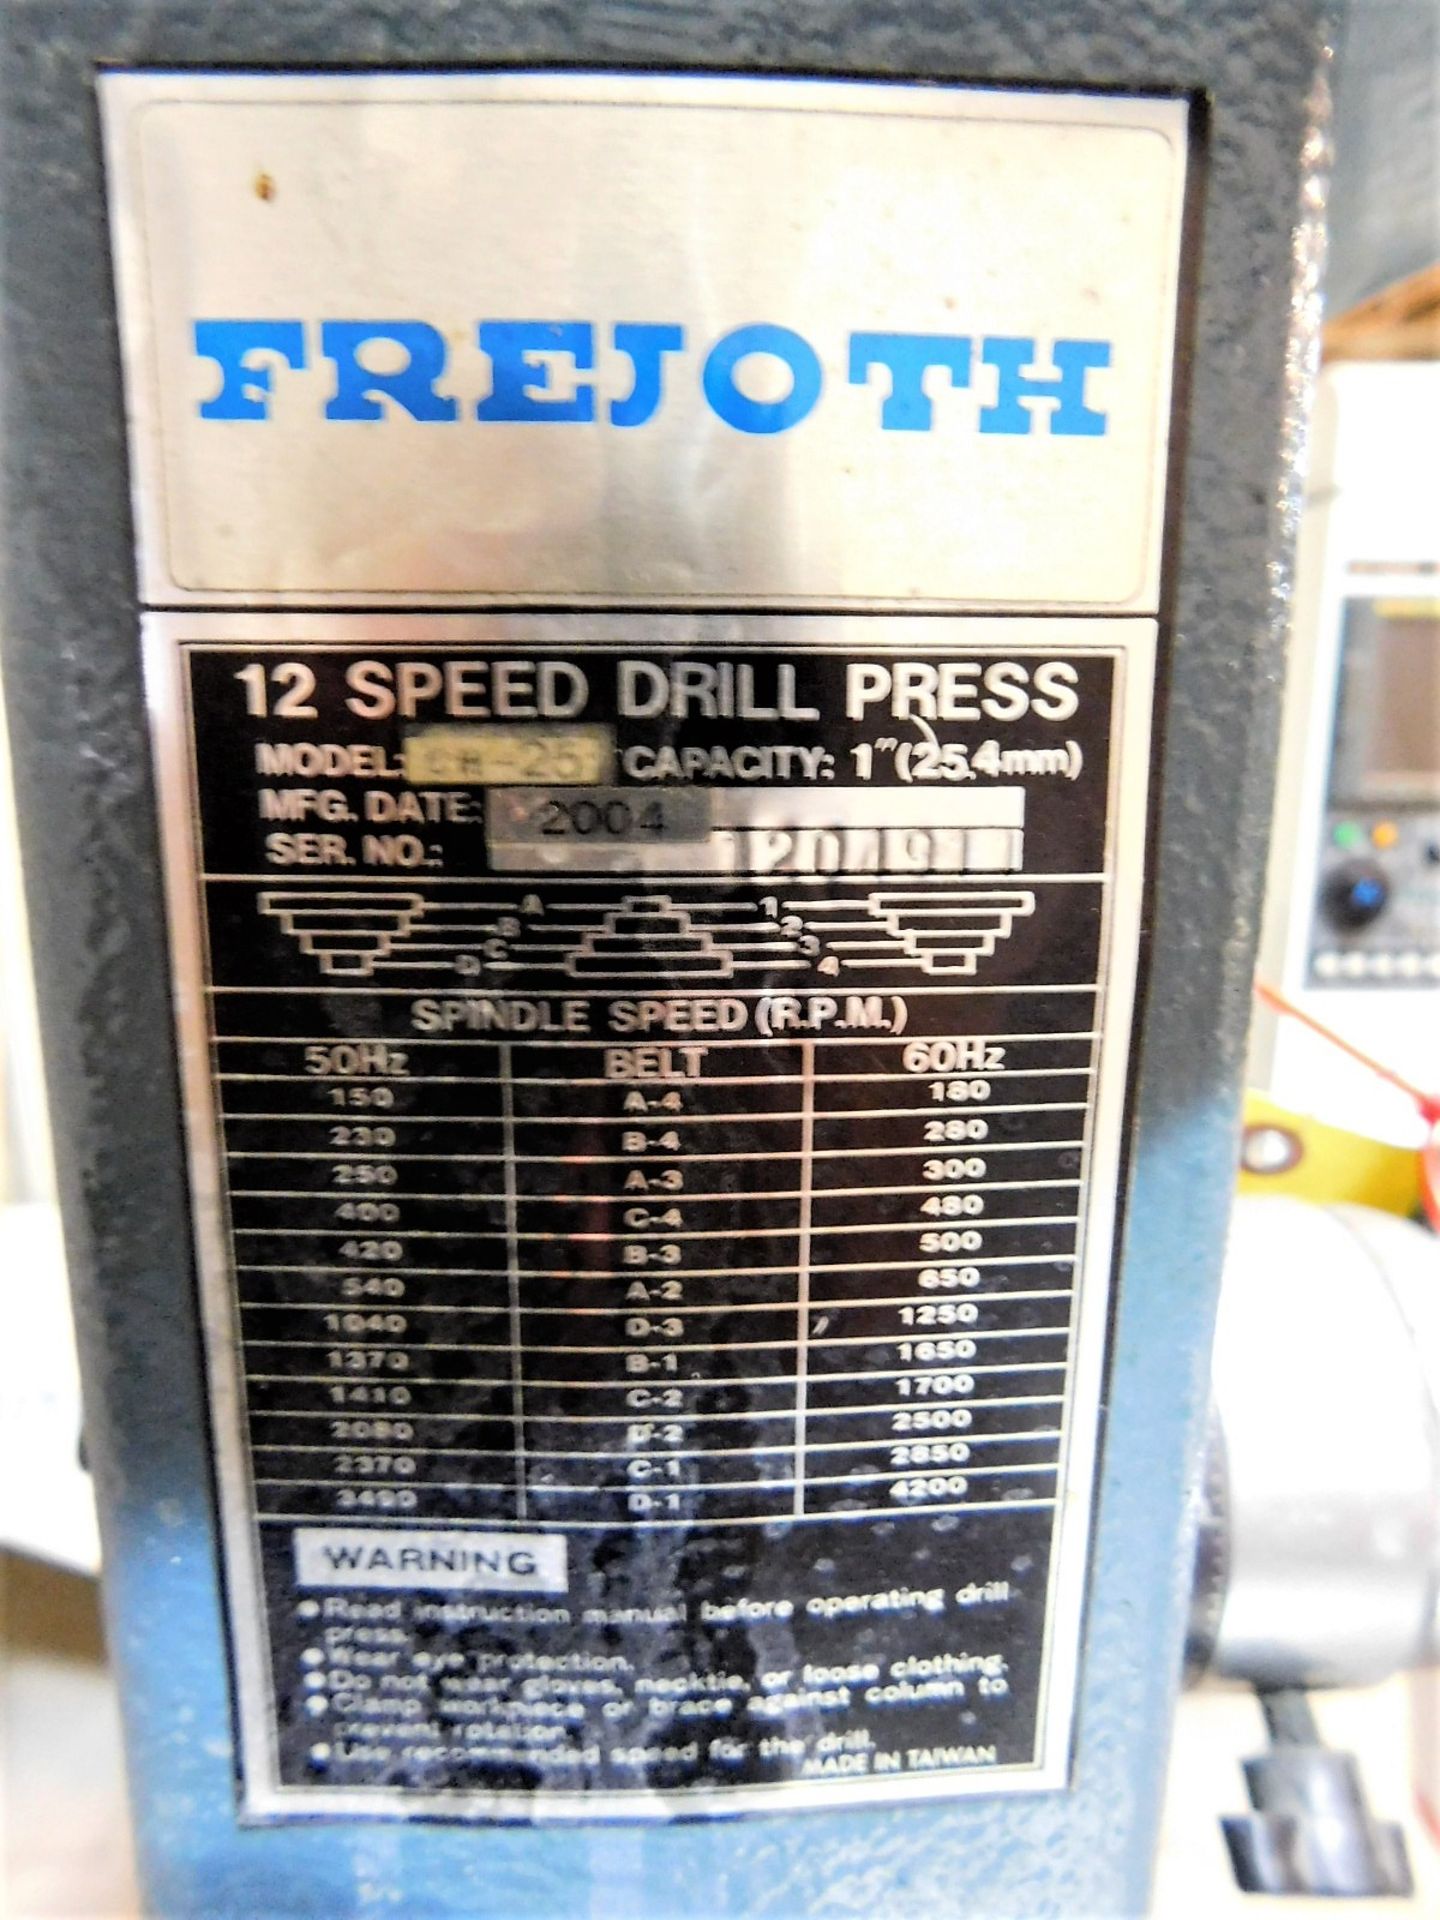 FREJOTH 22" DRILL PRESS, MODEL CH-25, S/N 1204911, FLOOR STAND, 12-SPEED, NO CHUCK - Image 3 of 3